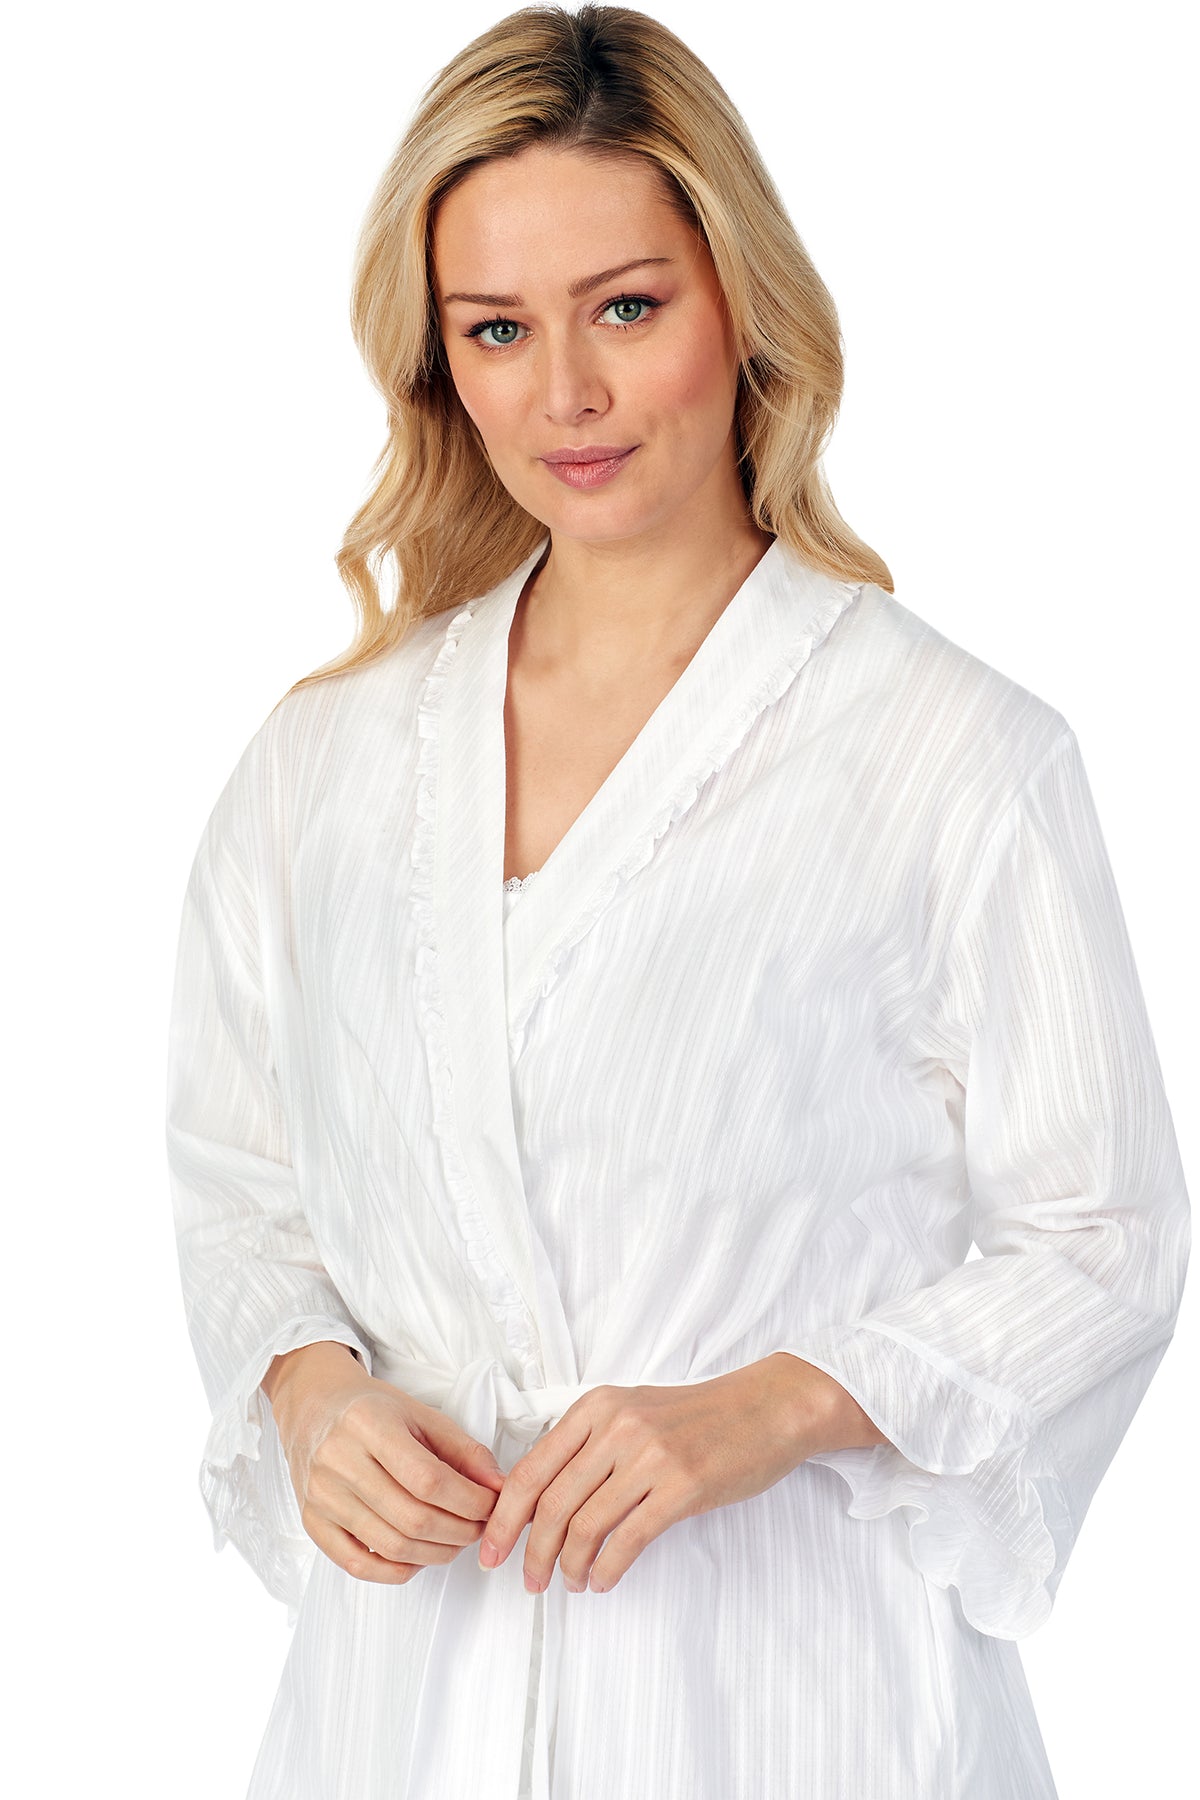 A lady wearing white short wrap robe with long sleeves.